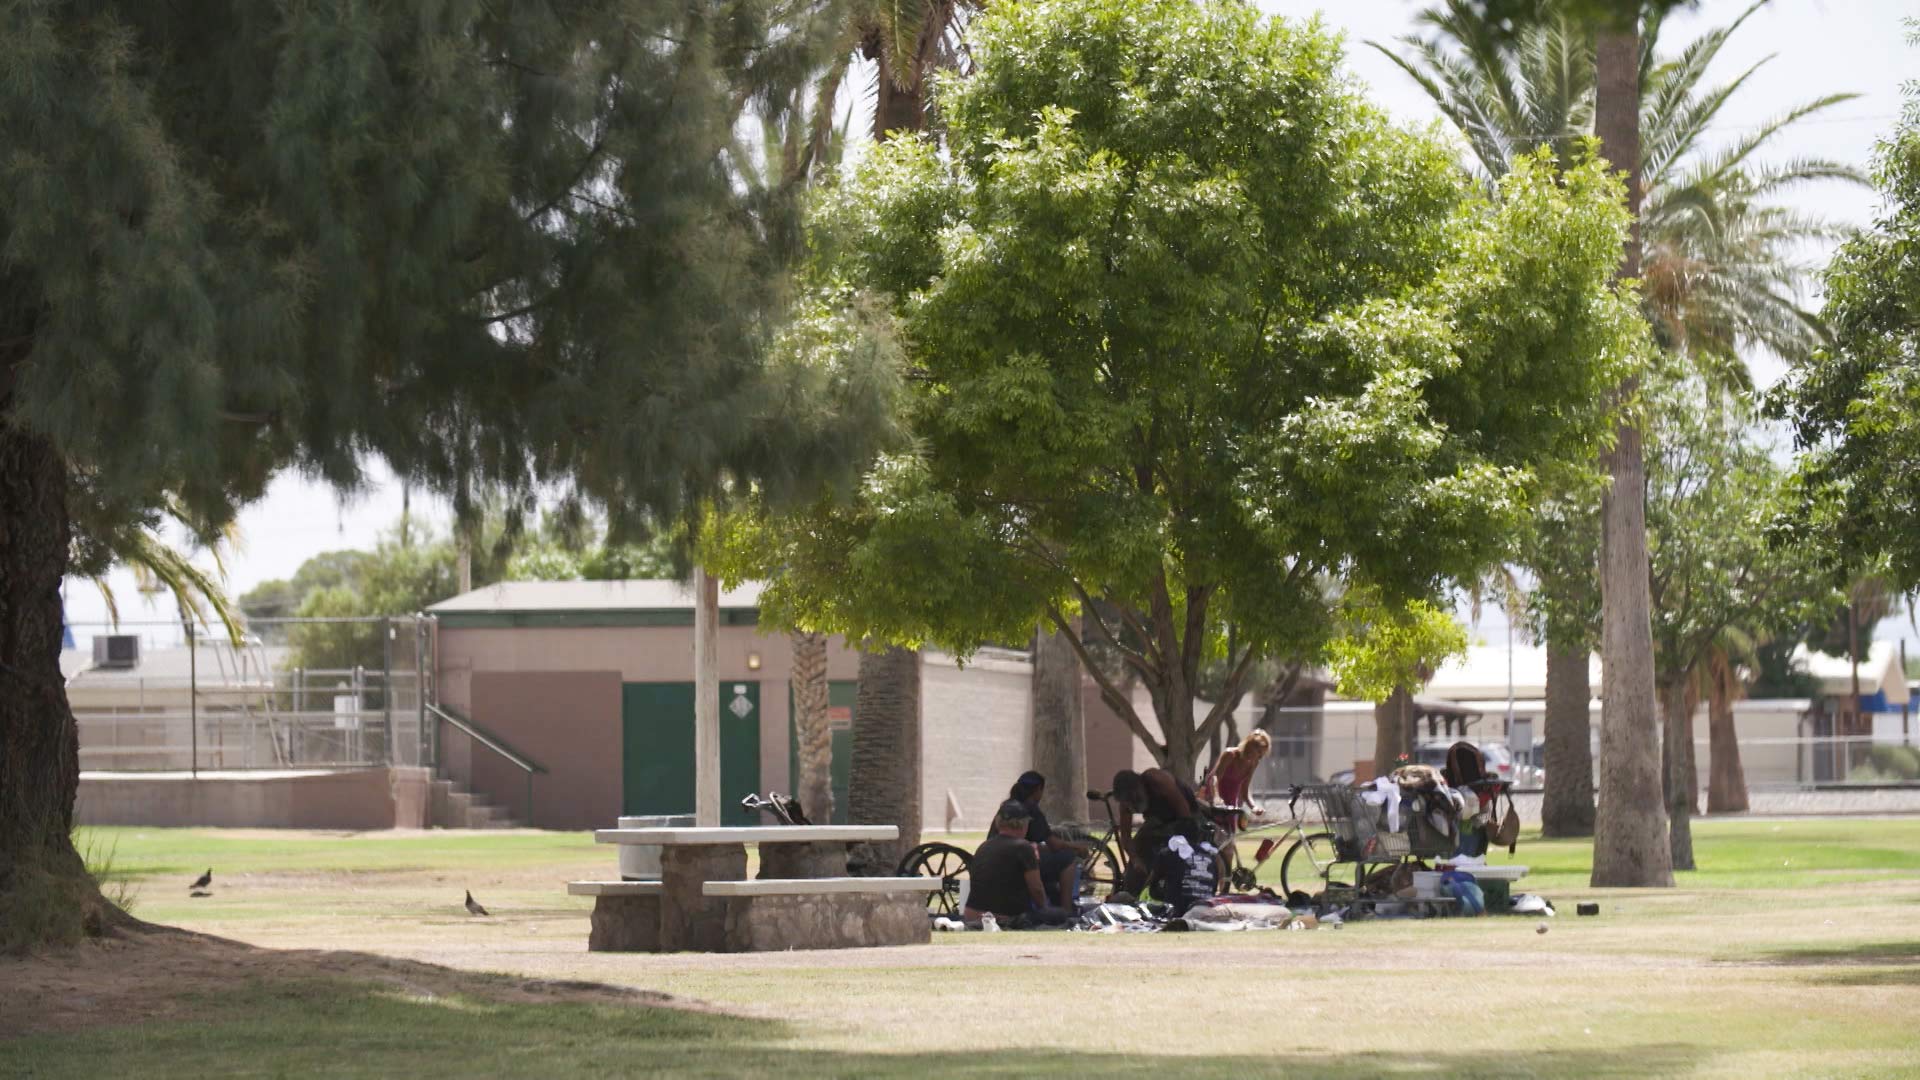 A group hangs out in the shade in Santa Rita Park in Tucson.